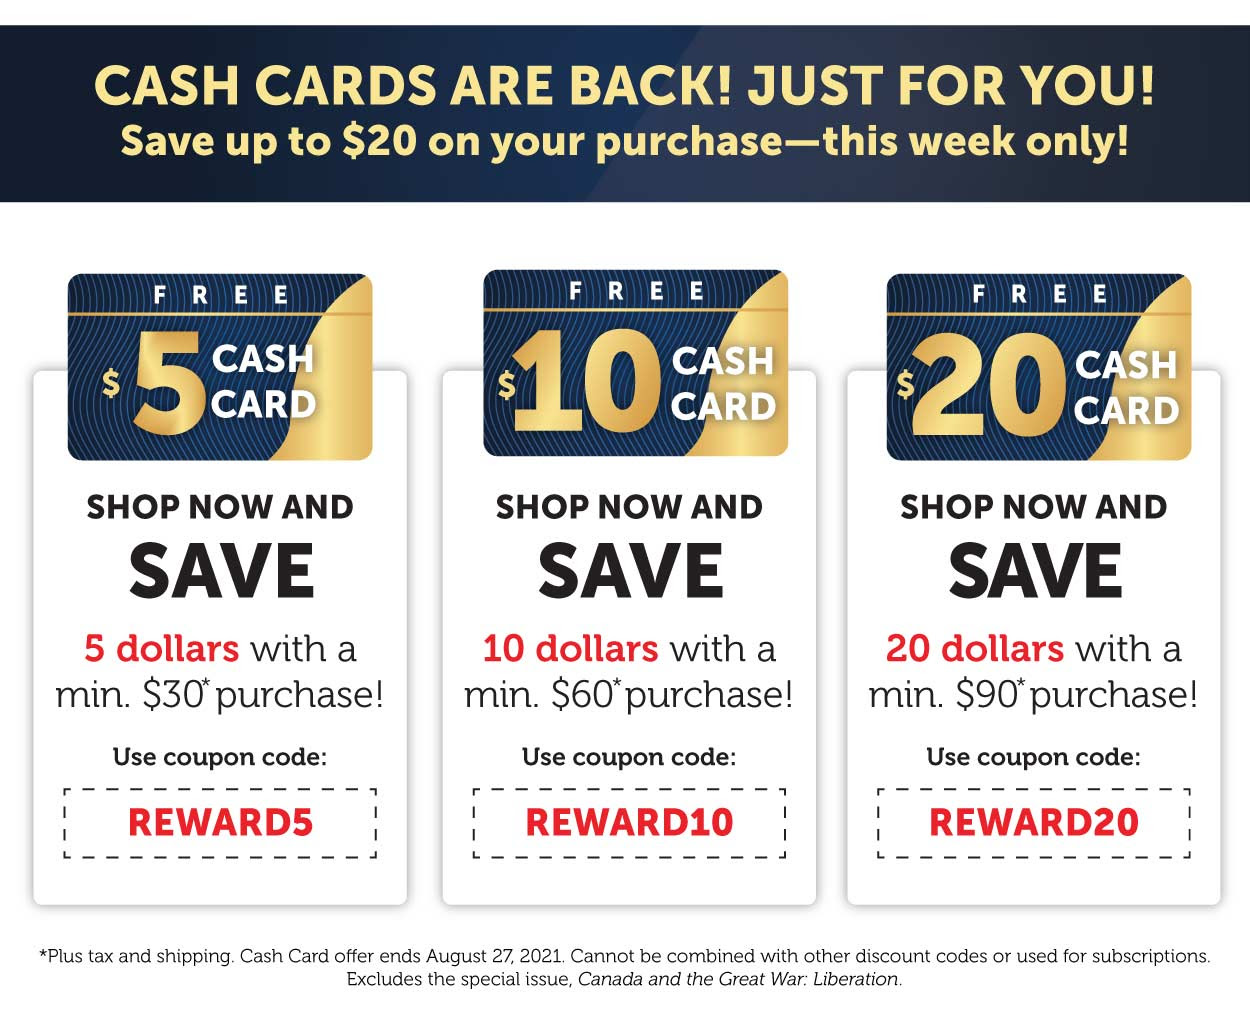 Cash Cards are back!